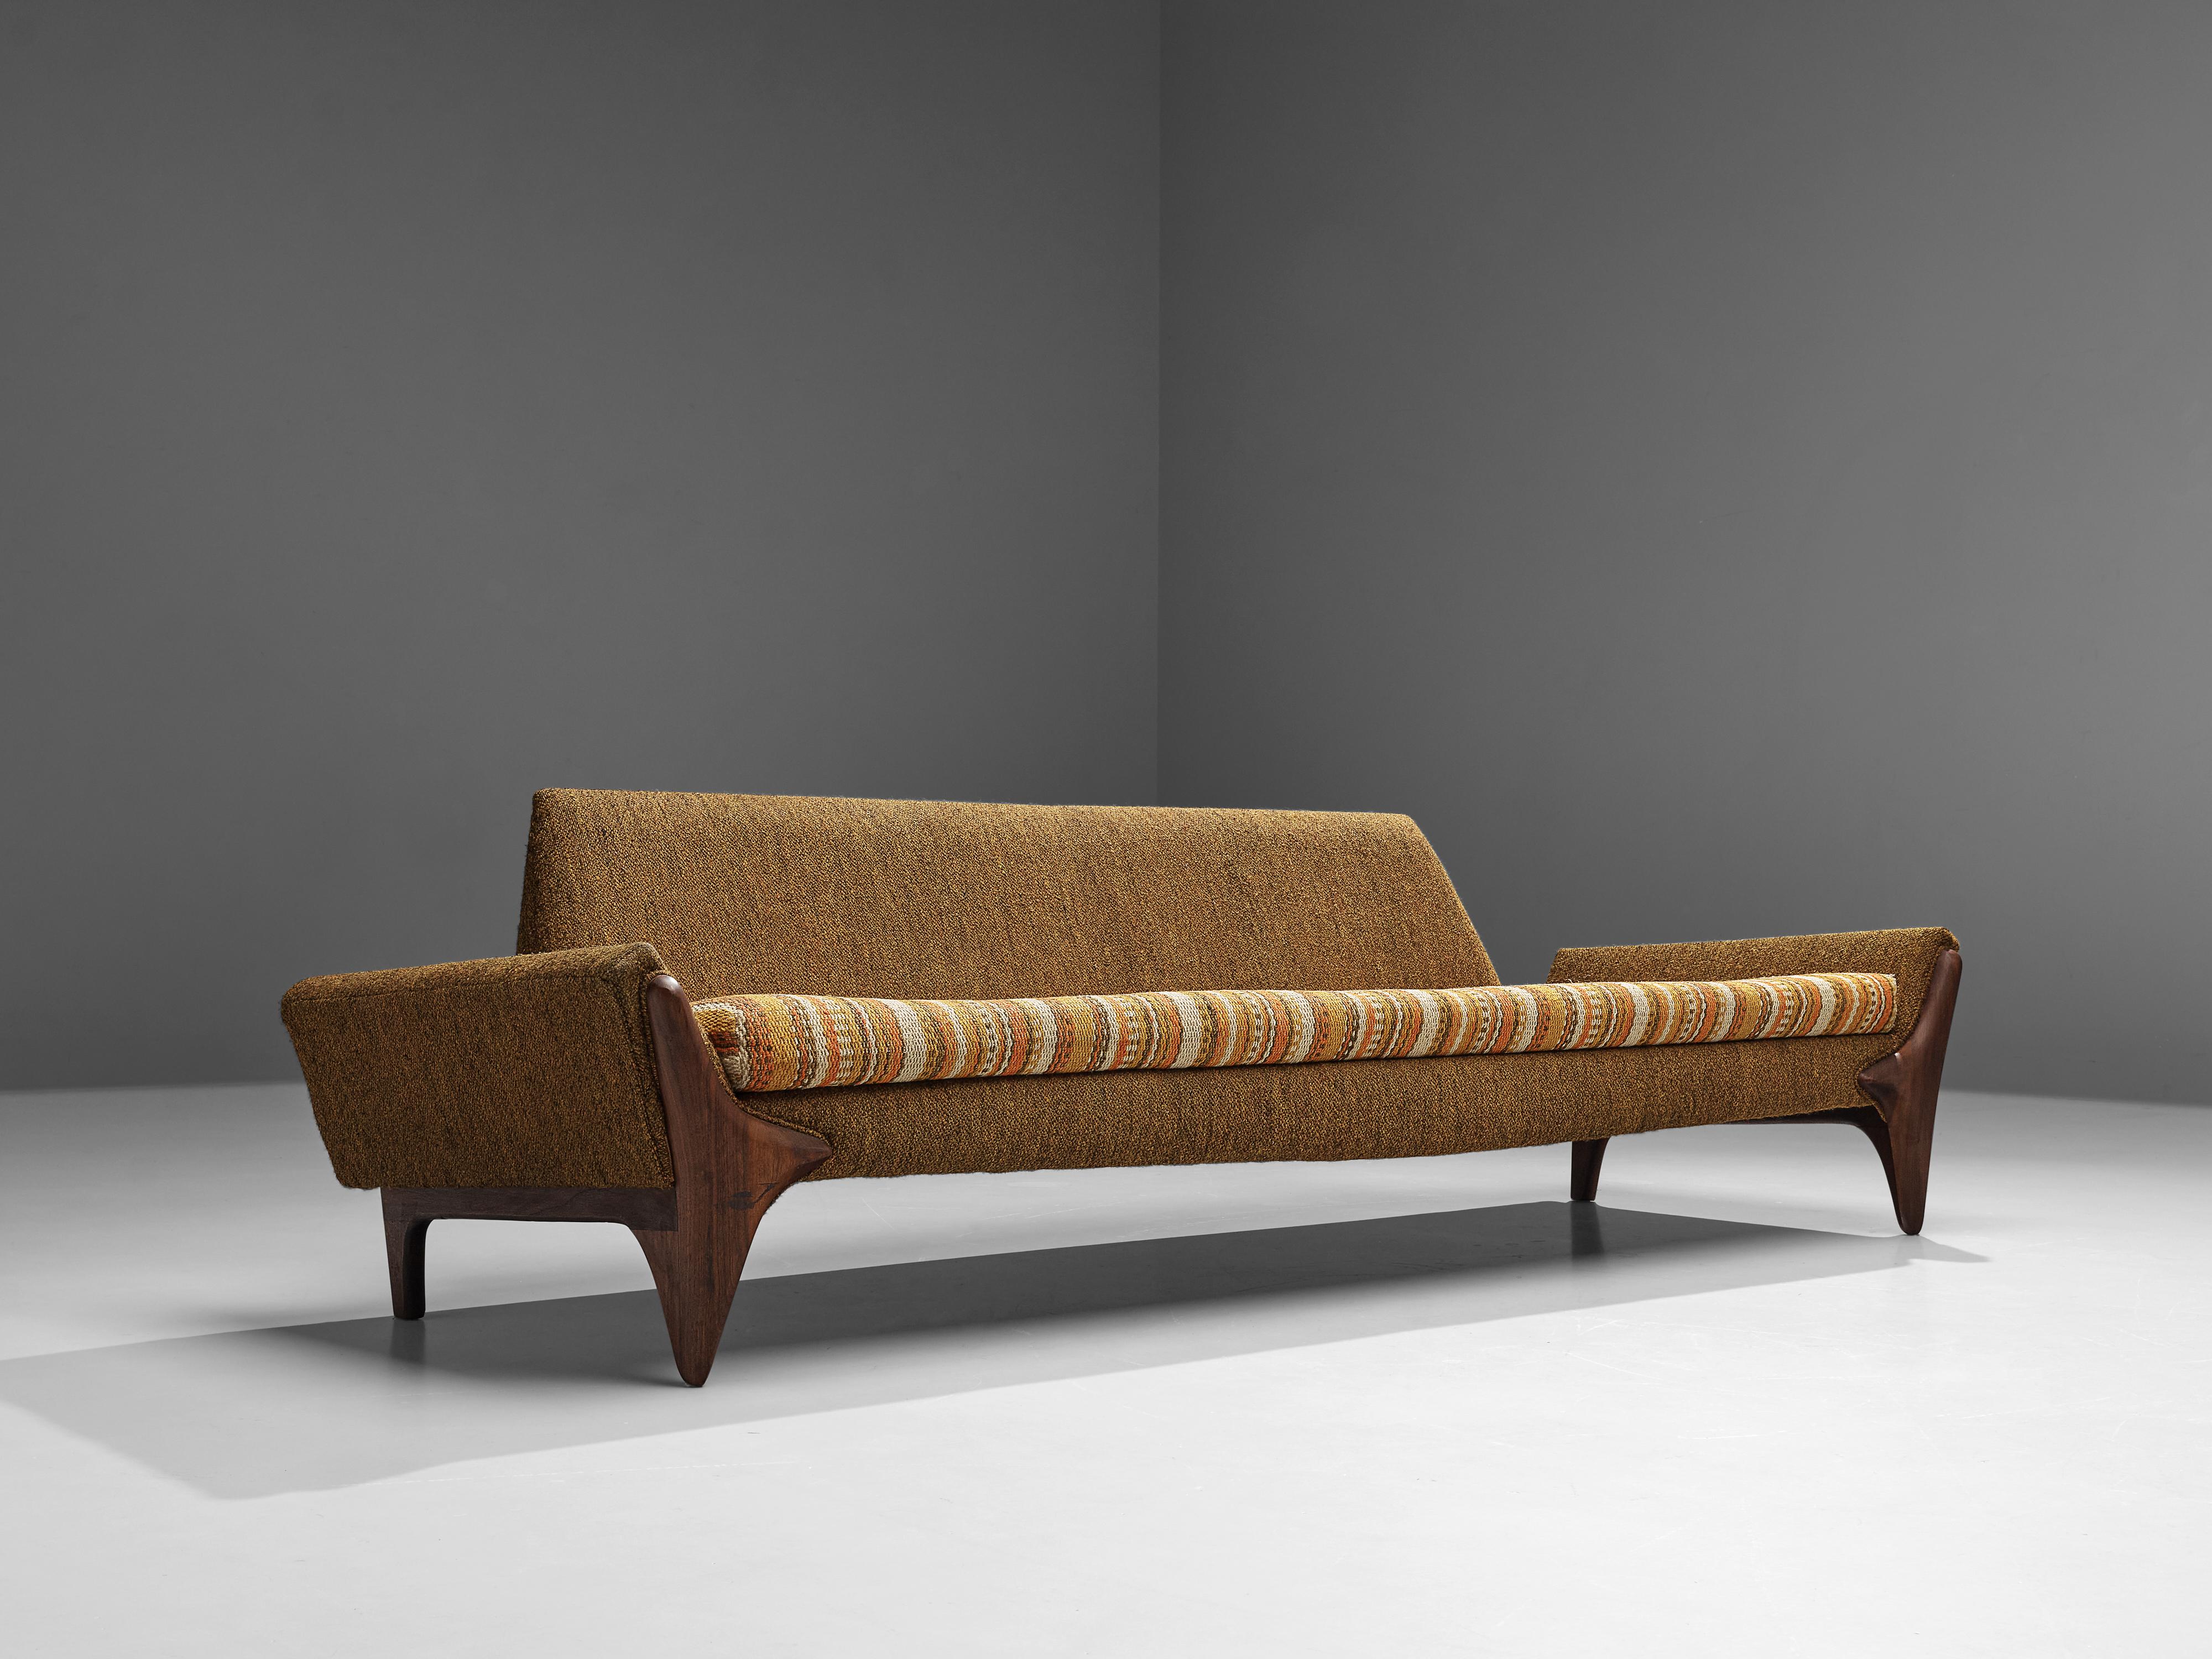 Adrian Pearsall, sofa, American walnut, fabric, United States, 1960s.

This beautifully shaped sofa designed by Adrian Pearsall is characterized by a solid construction, featuring clear lines and sharp shapes. The boomerang shaped legs uplift the